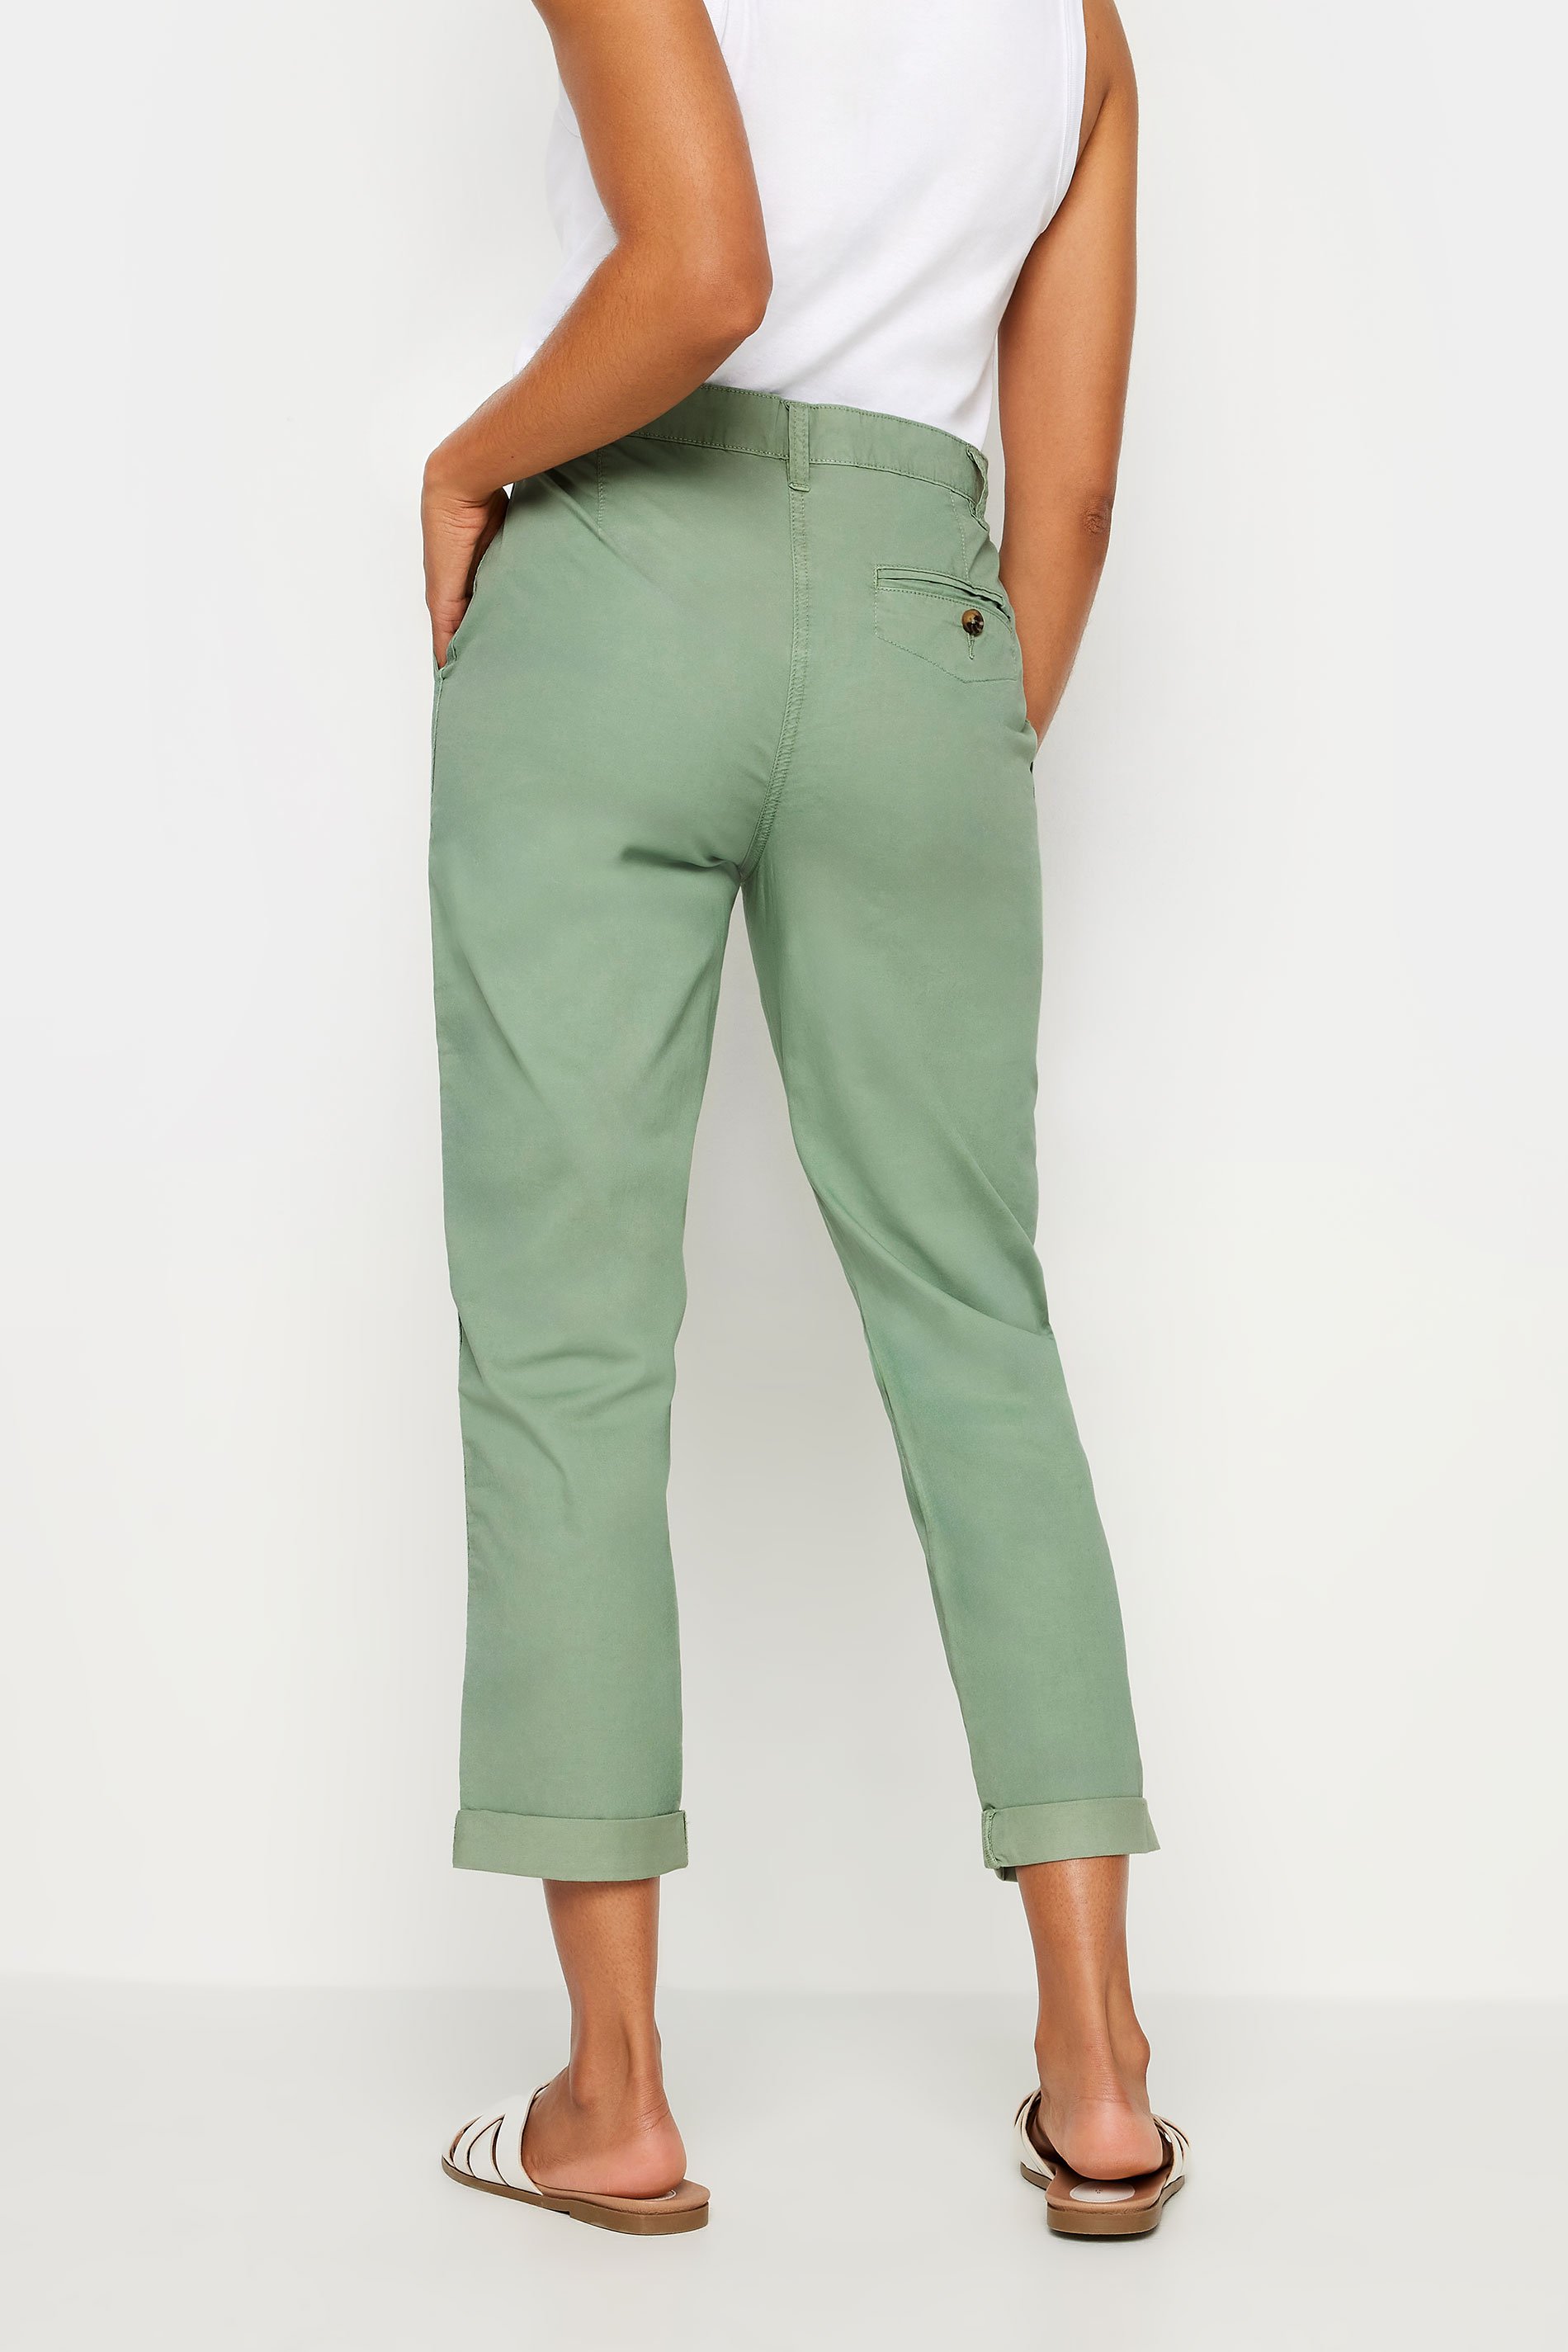 M&Co Sage Green Chino Trousers | M&Co 3